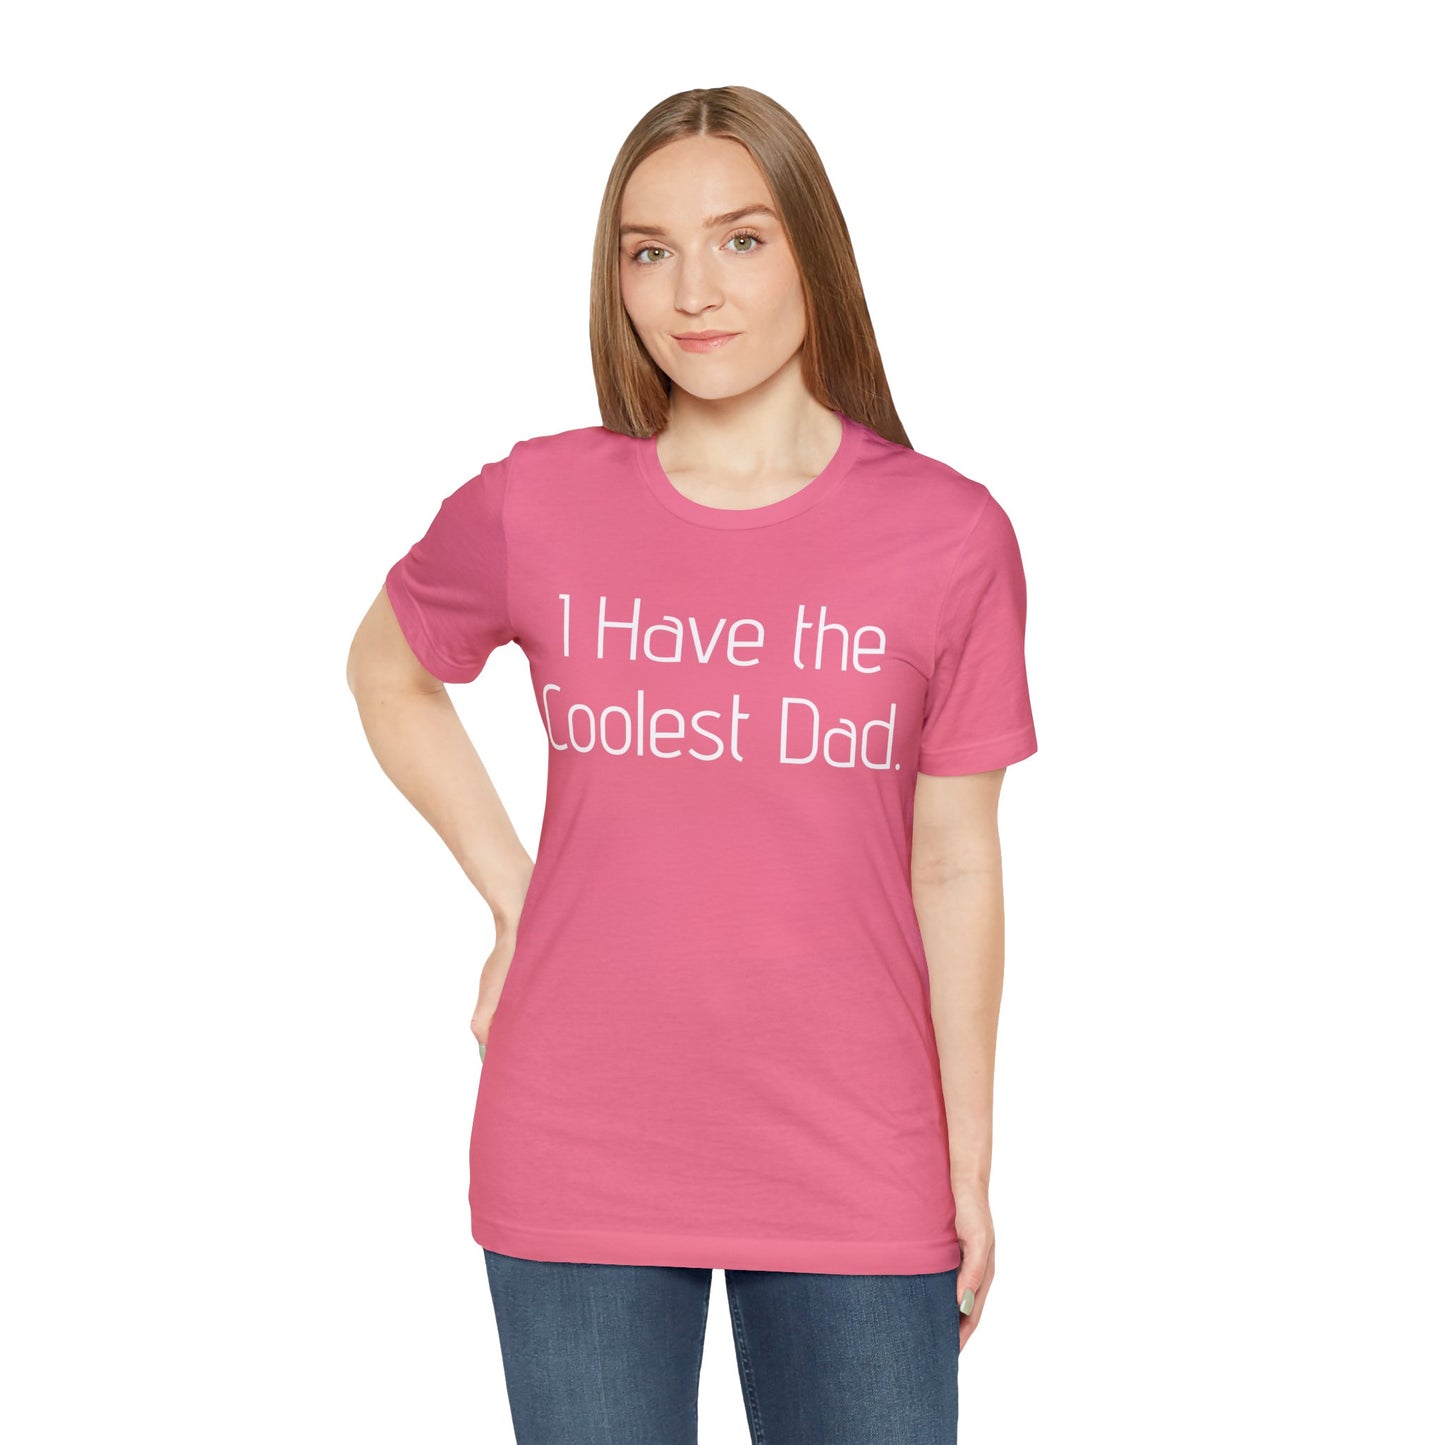 For Son | Daughter Gift Idea From Dad | T-Shirt For Son or Daugher Charity Pink T-Shirt Petrova Designs